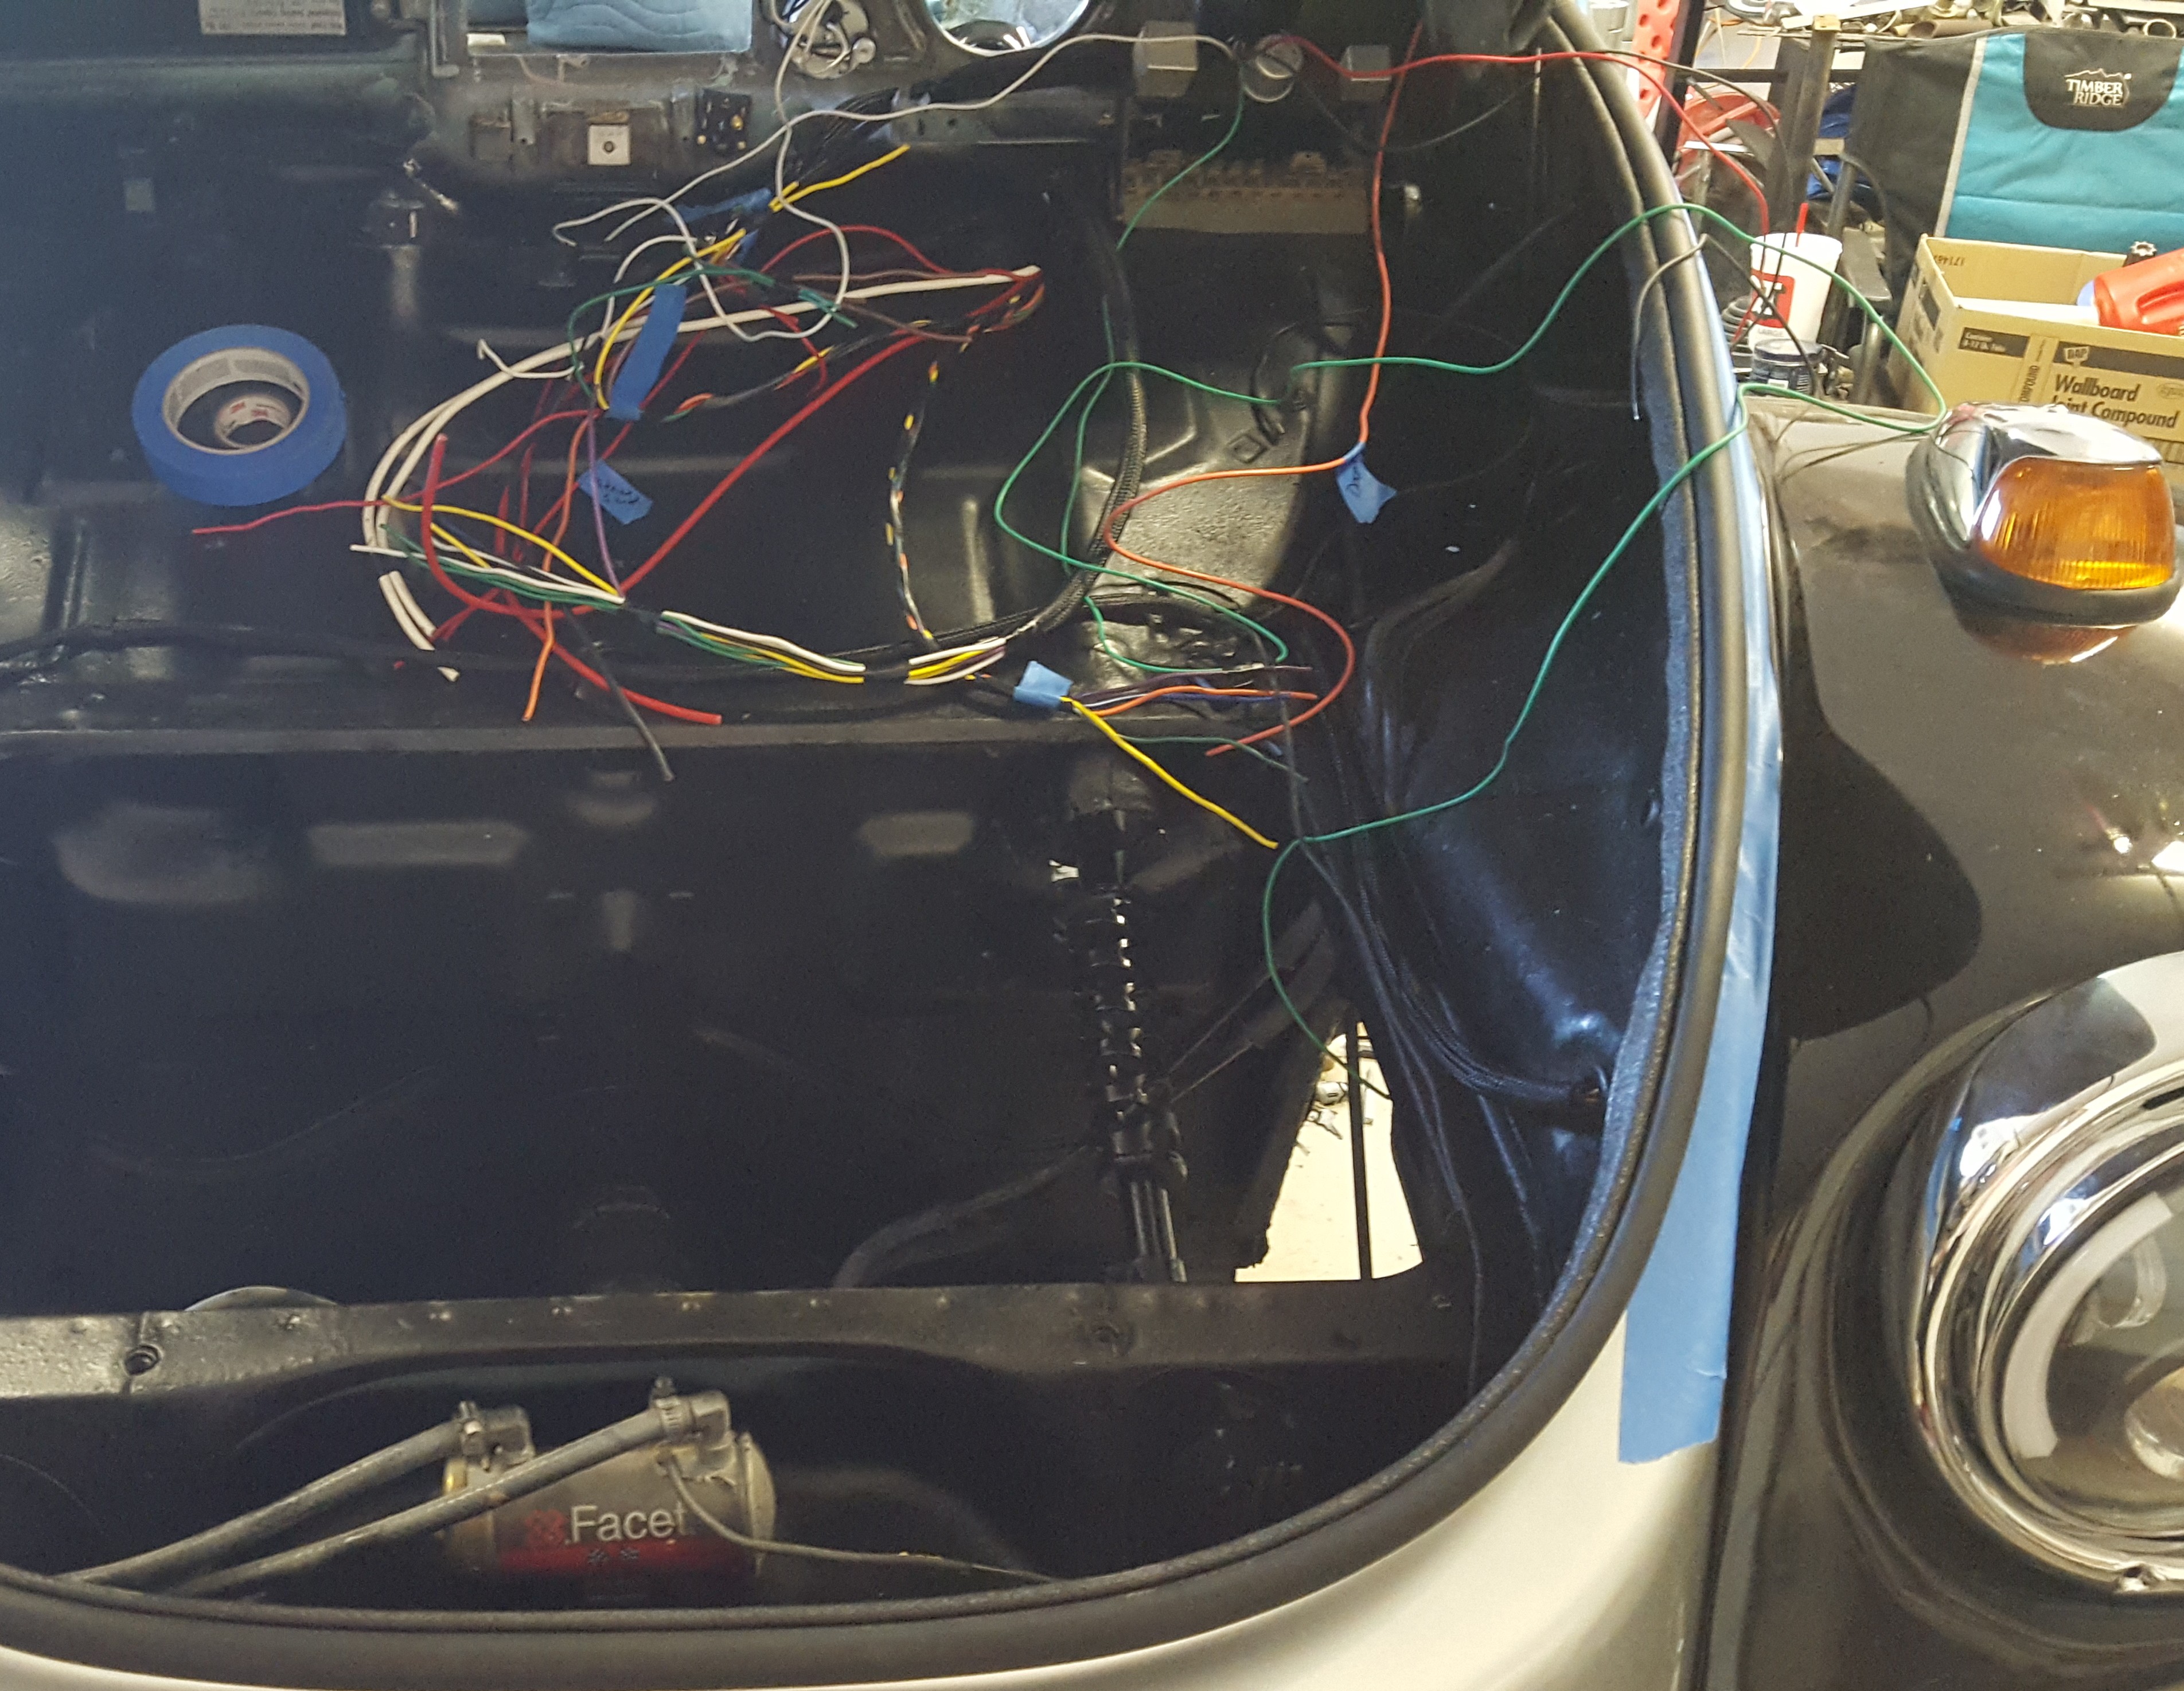 Wiring the Bug